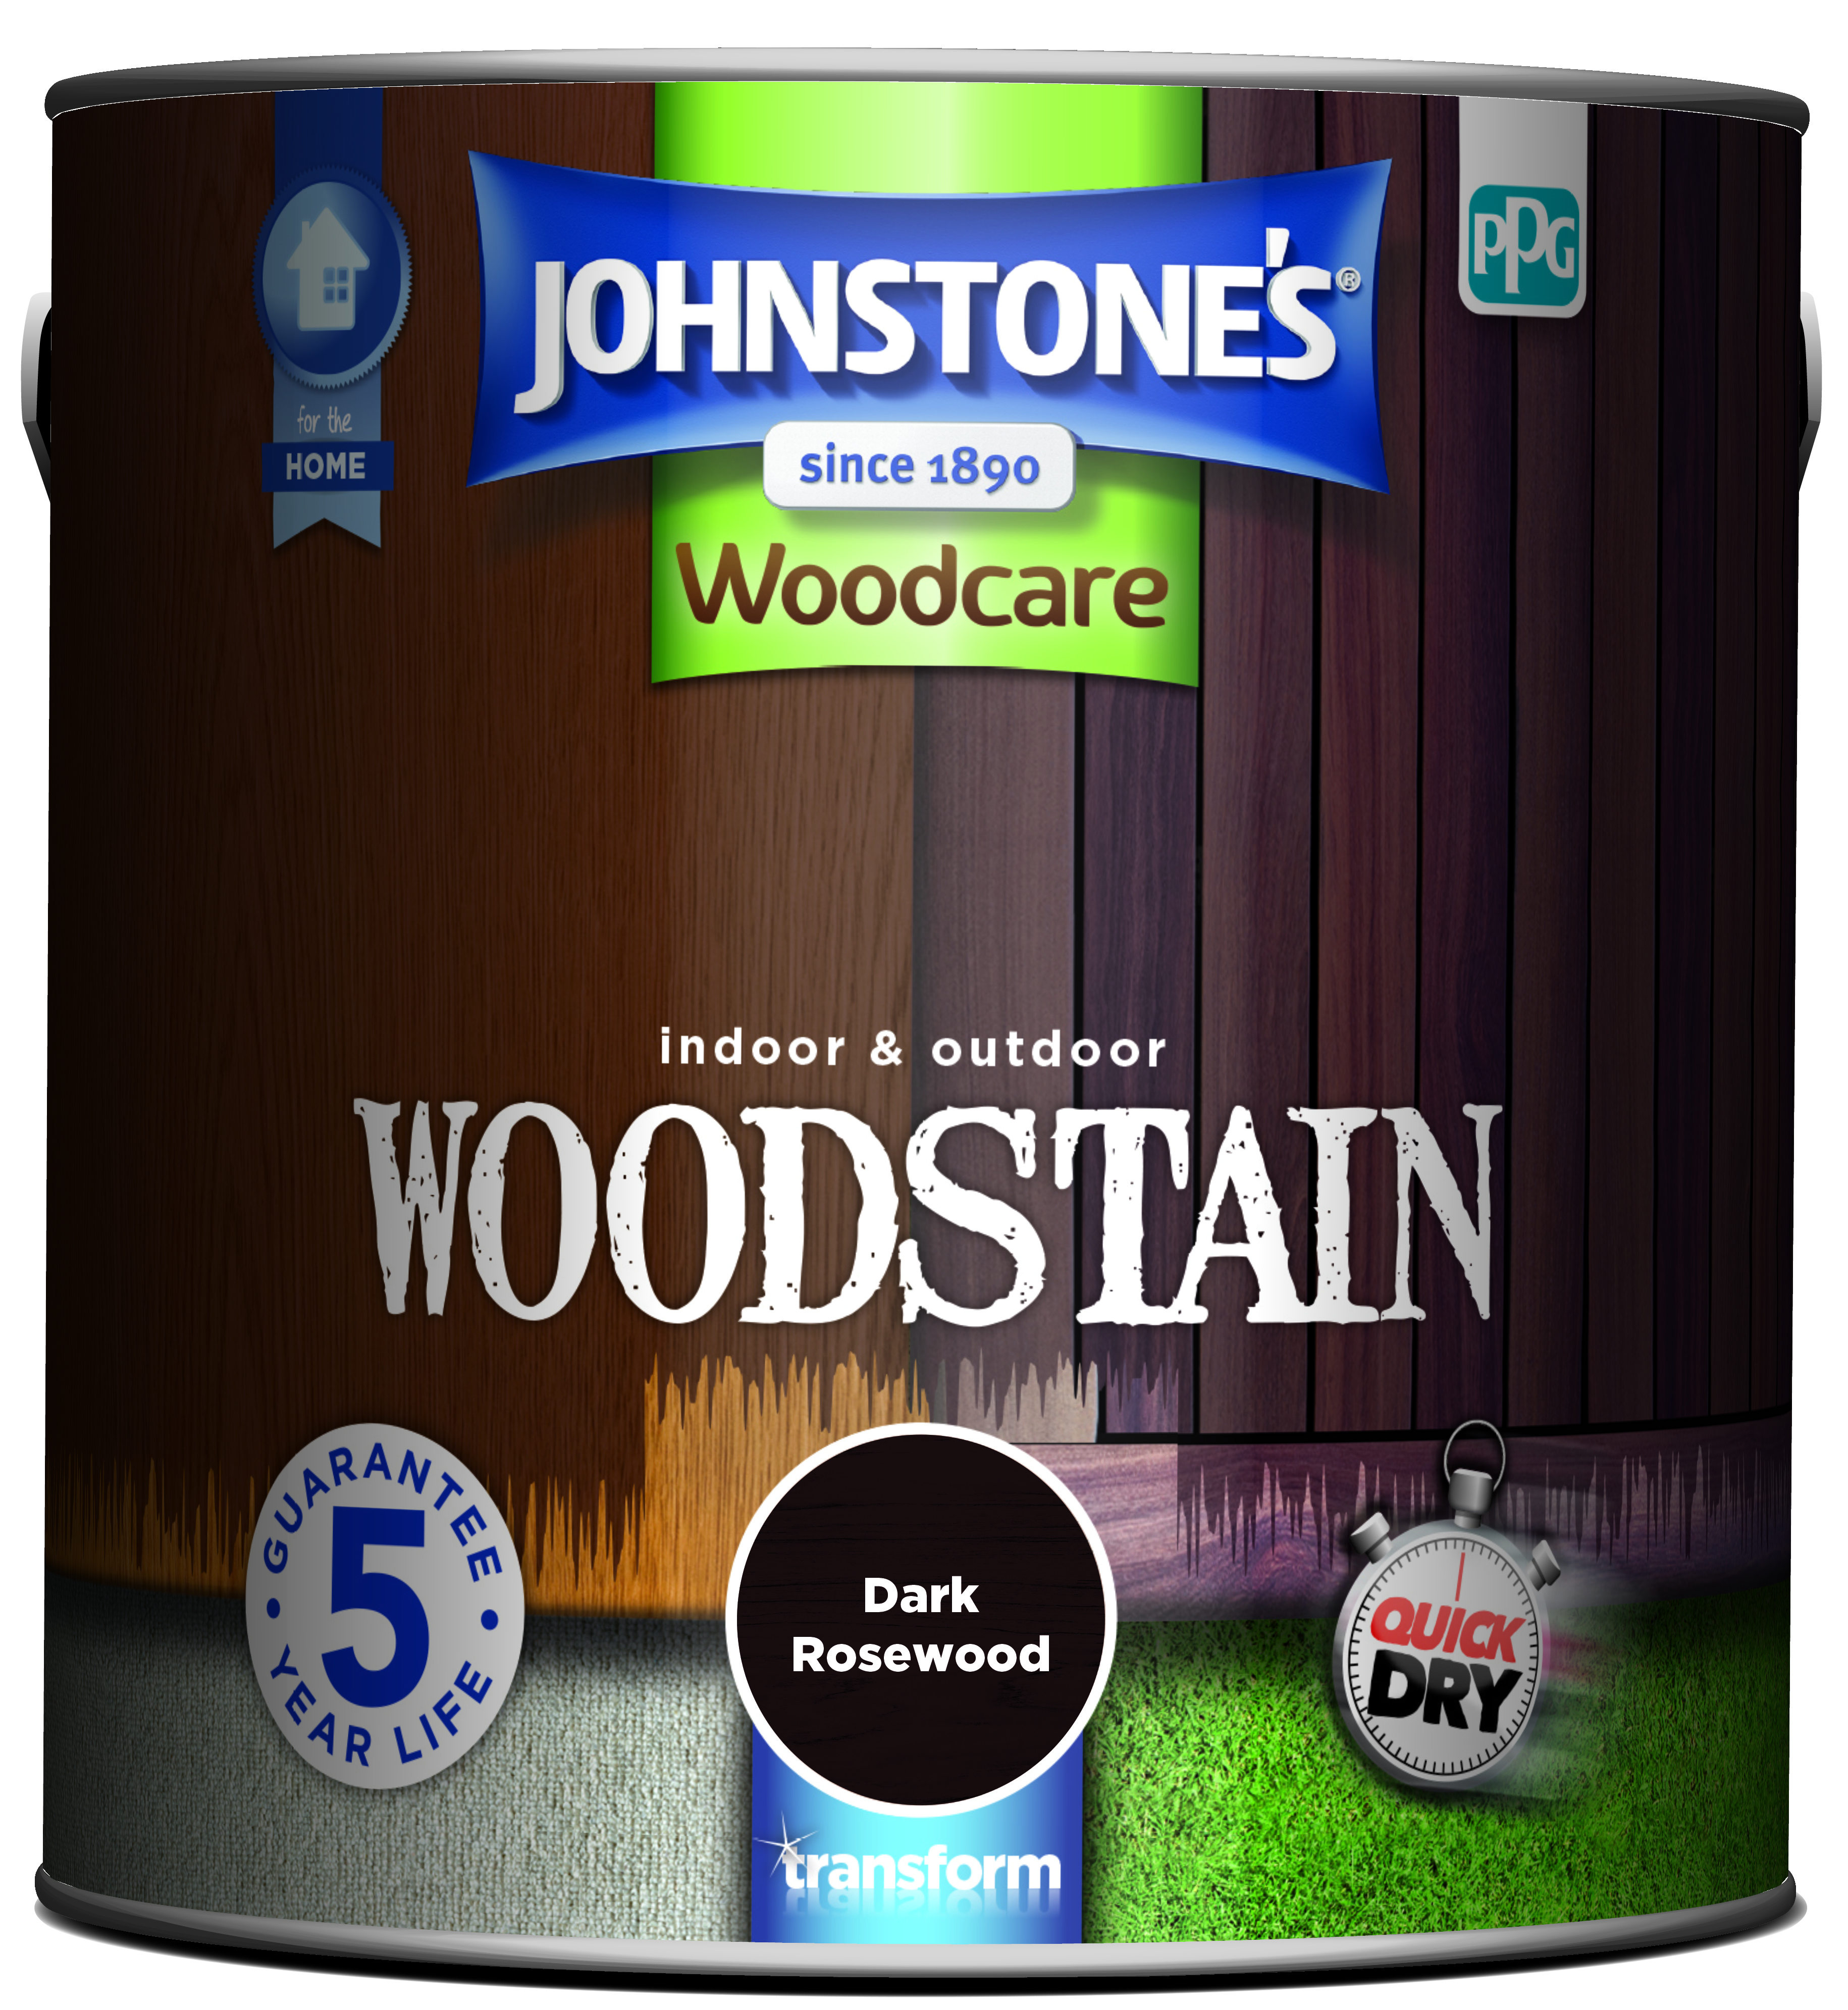 2.5ltr - Johnstone's Woodcare Woodstain Rosewood